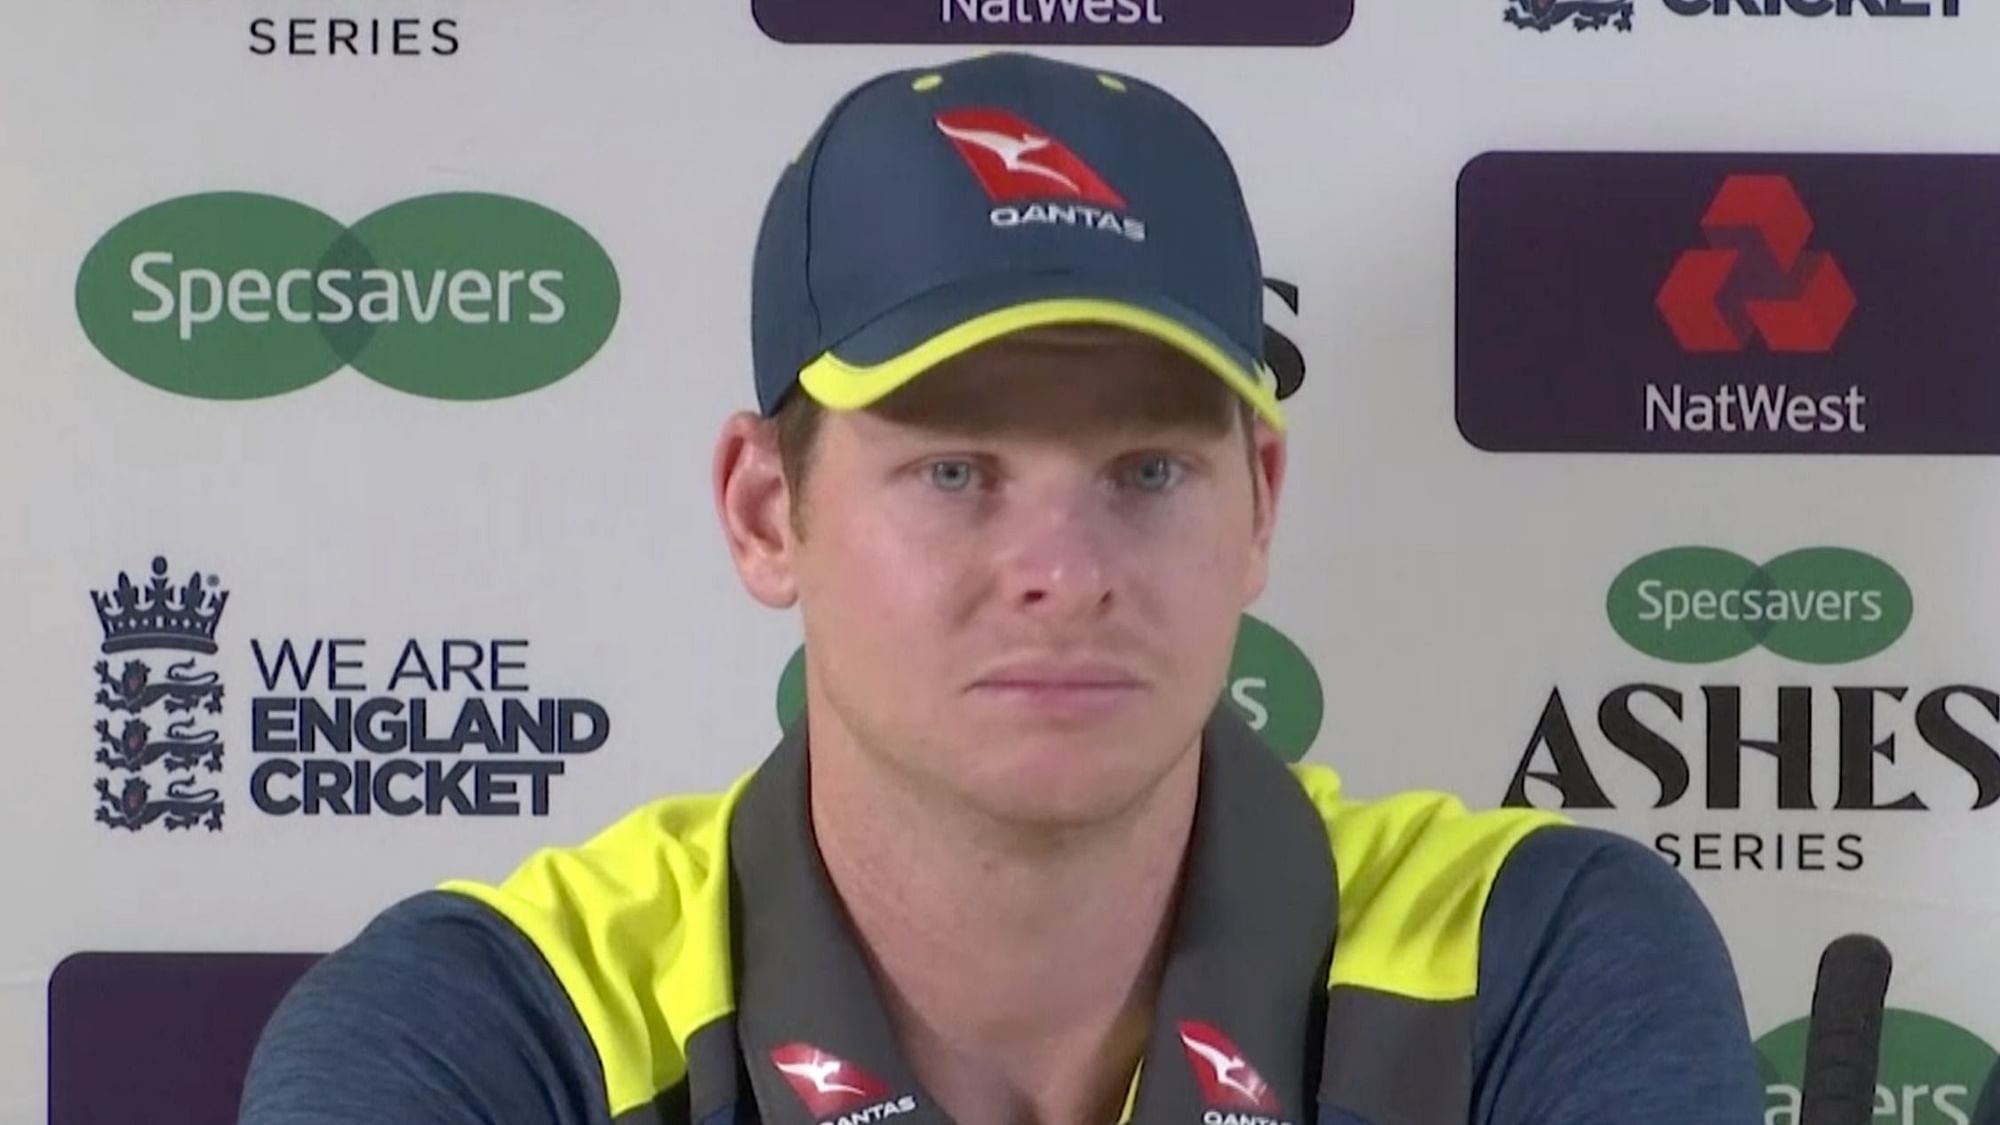 Steve Smith scored centuries in both innings of his first Test since the ball-tampering scandal.